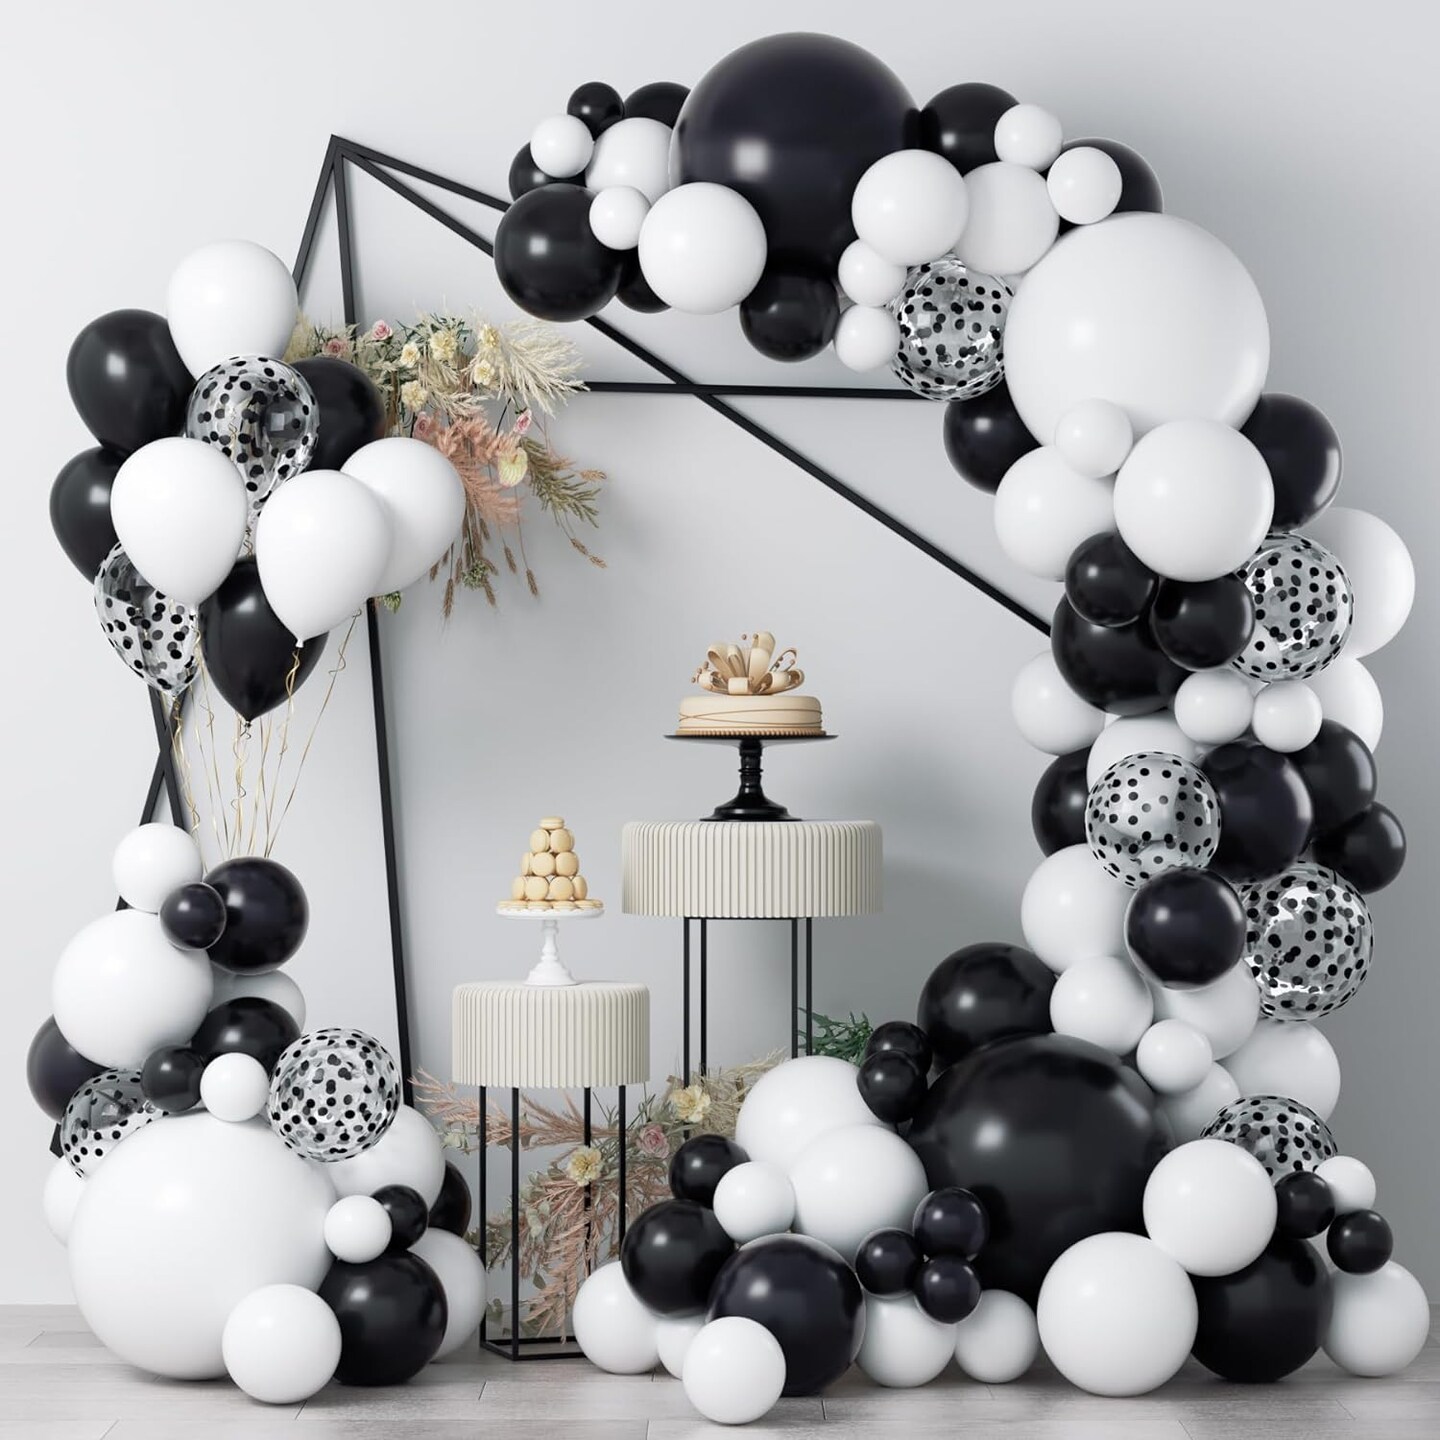 Black and White Balloon Garland Arch Kit, 124pcs White Black Confetti Latex Balloons for Baby Shower Birthday Graduation Wedding Engagements Anniversary Celebrations Party Decorations